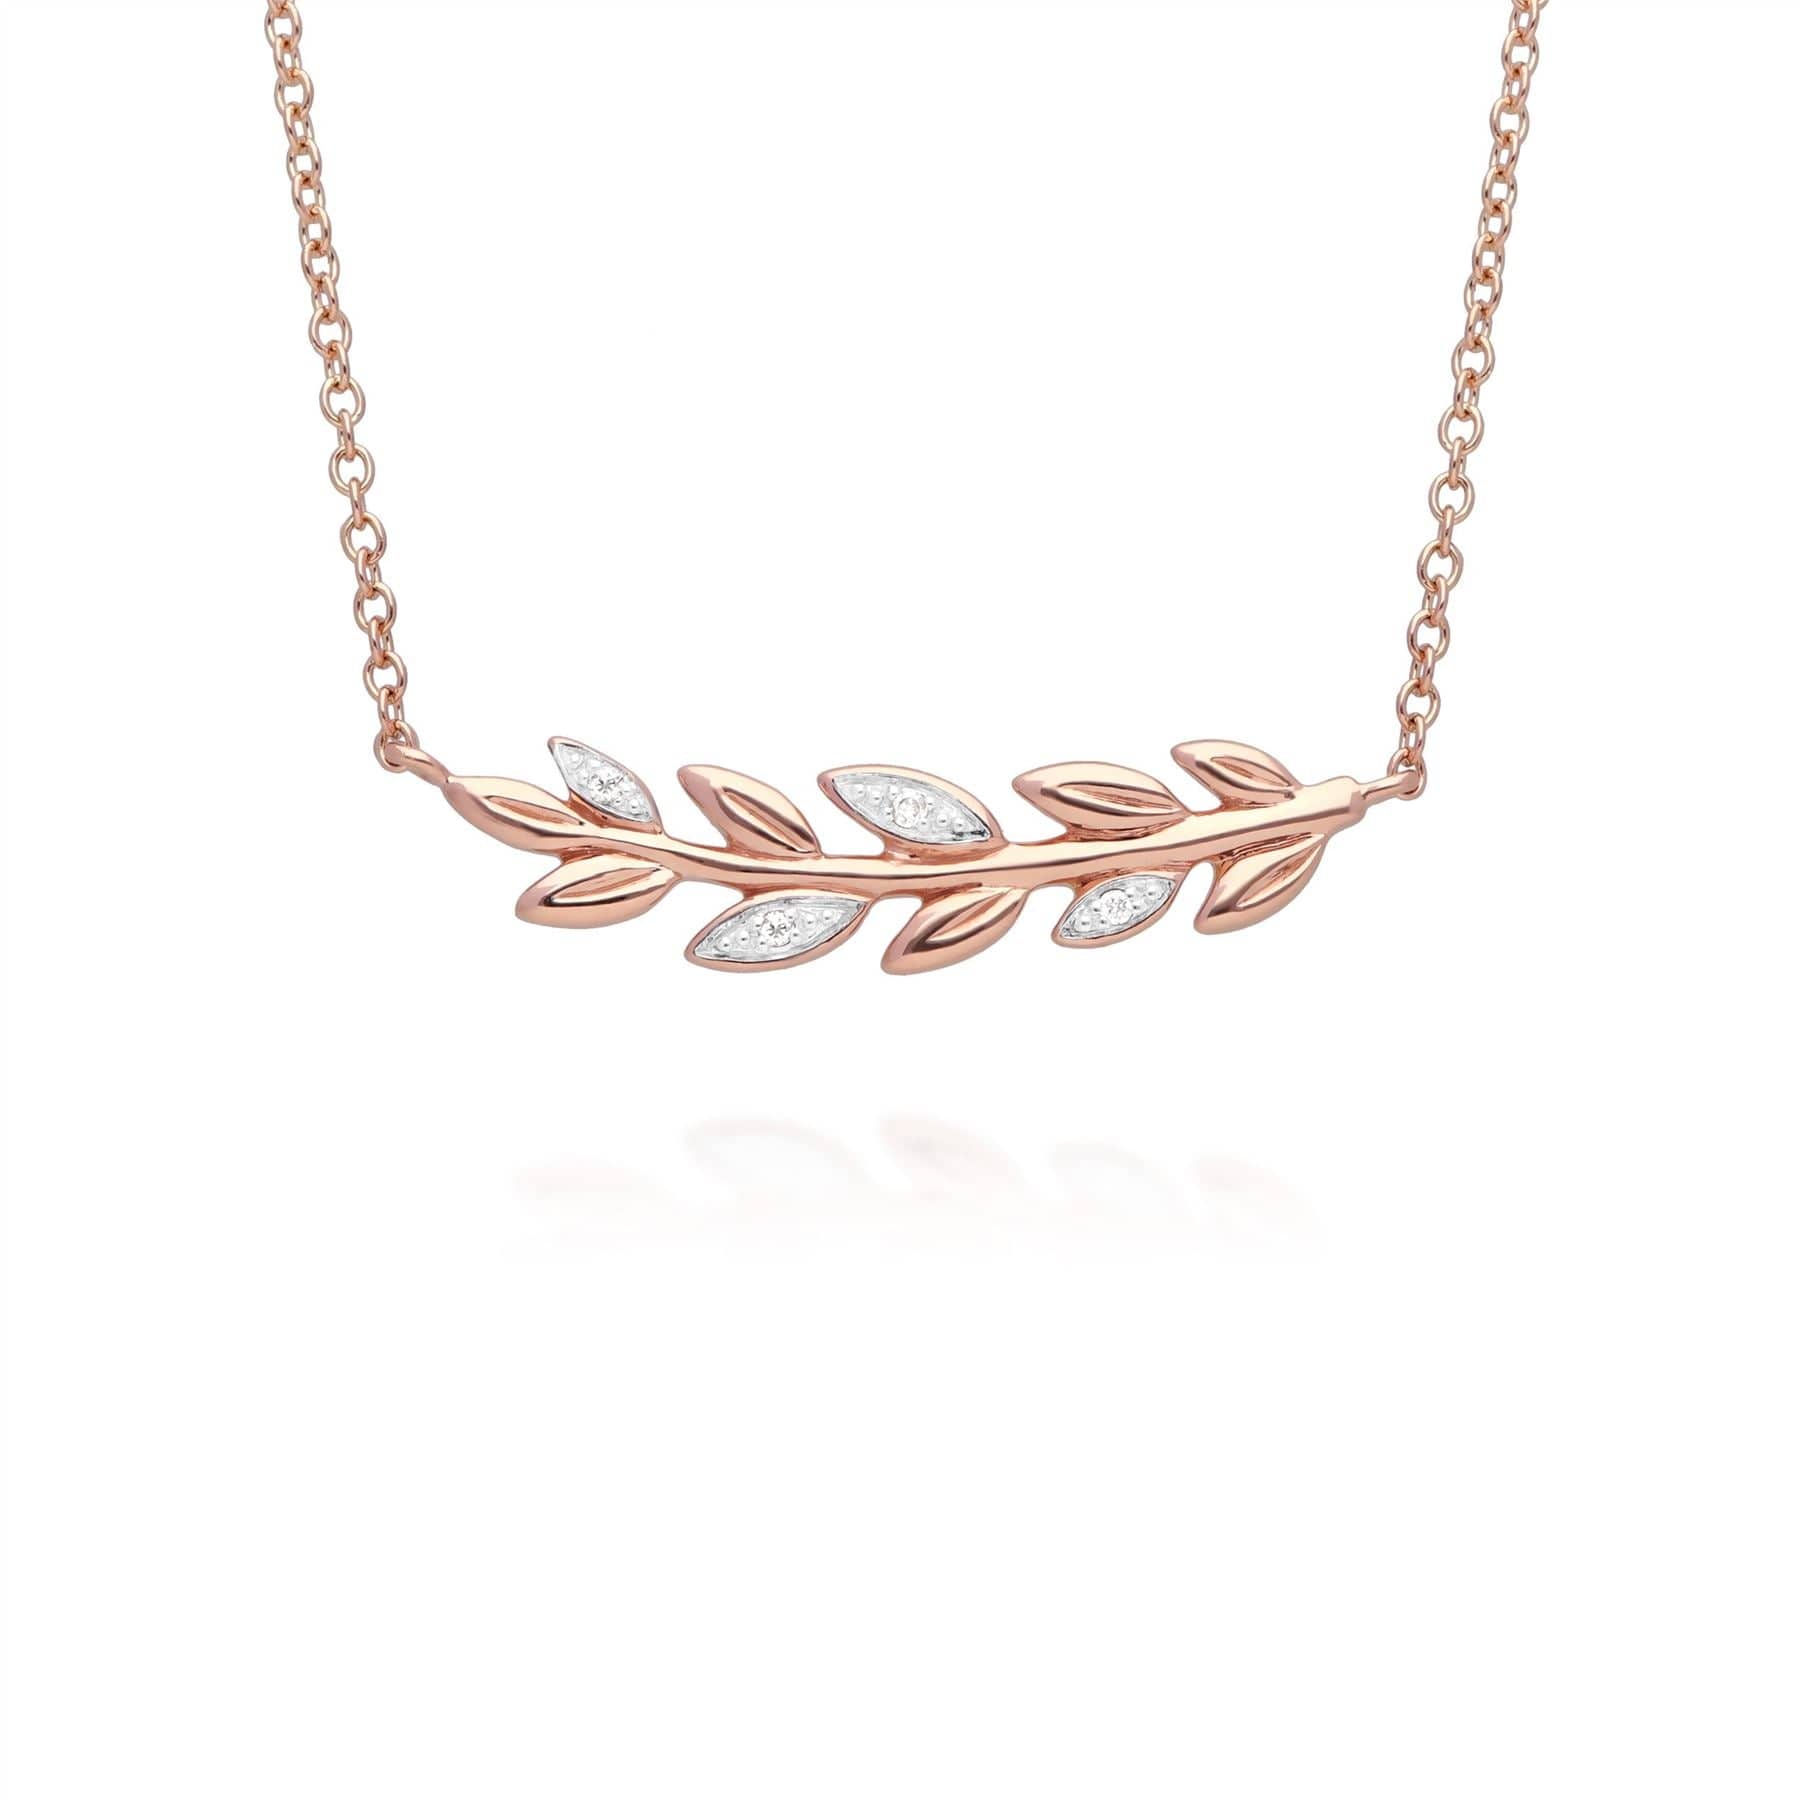 191N0231019 O Leaf Diamond Necklace in 9ct Rose Gold 1